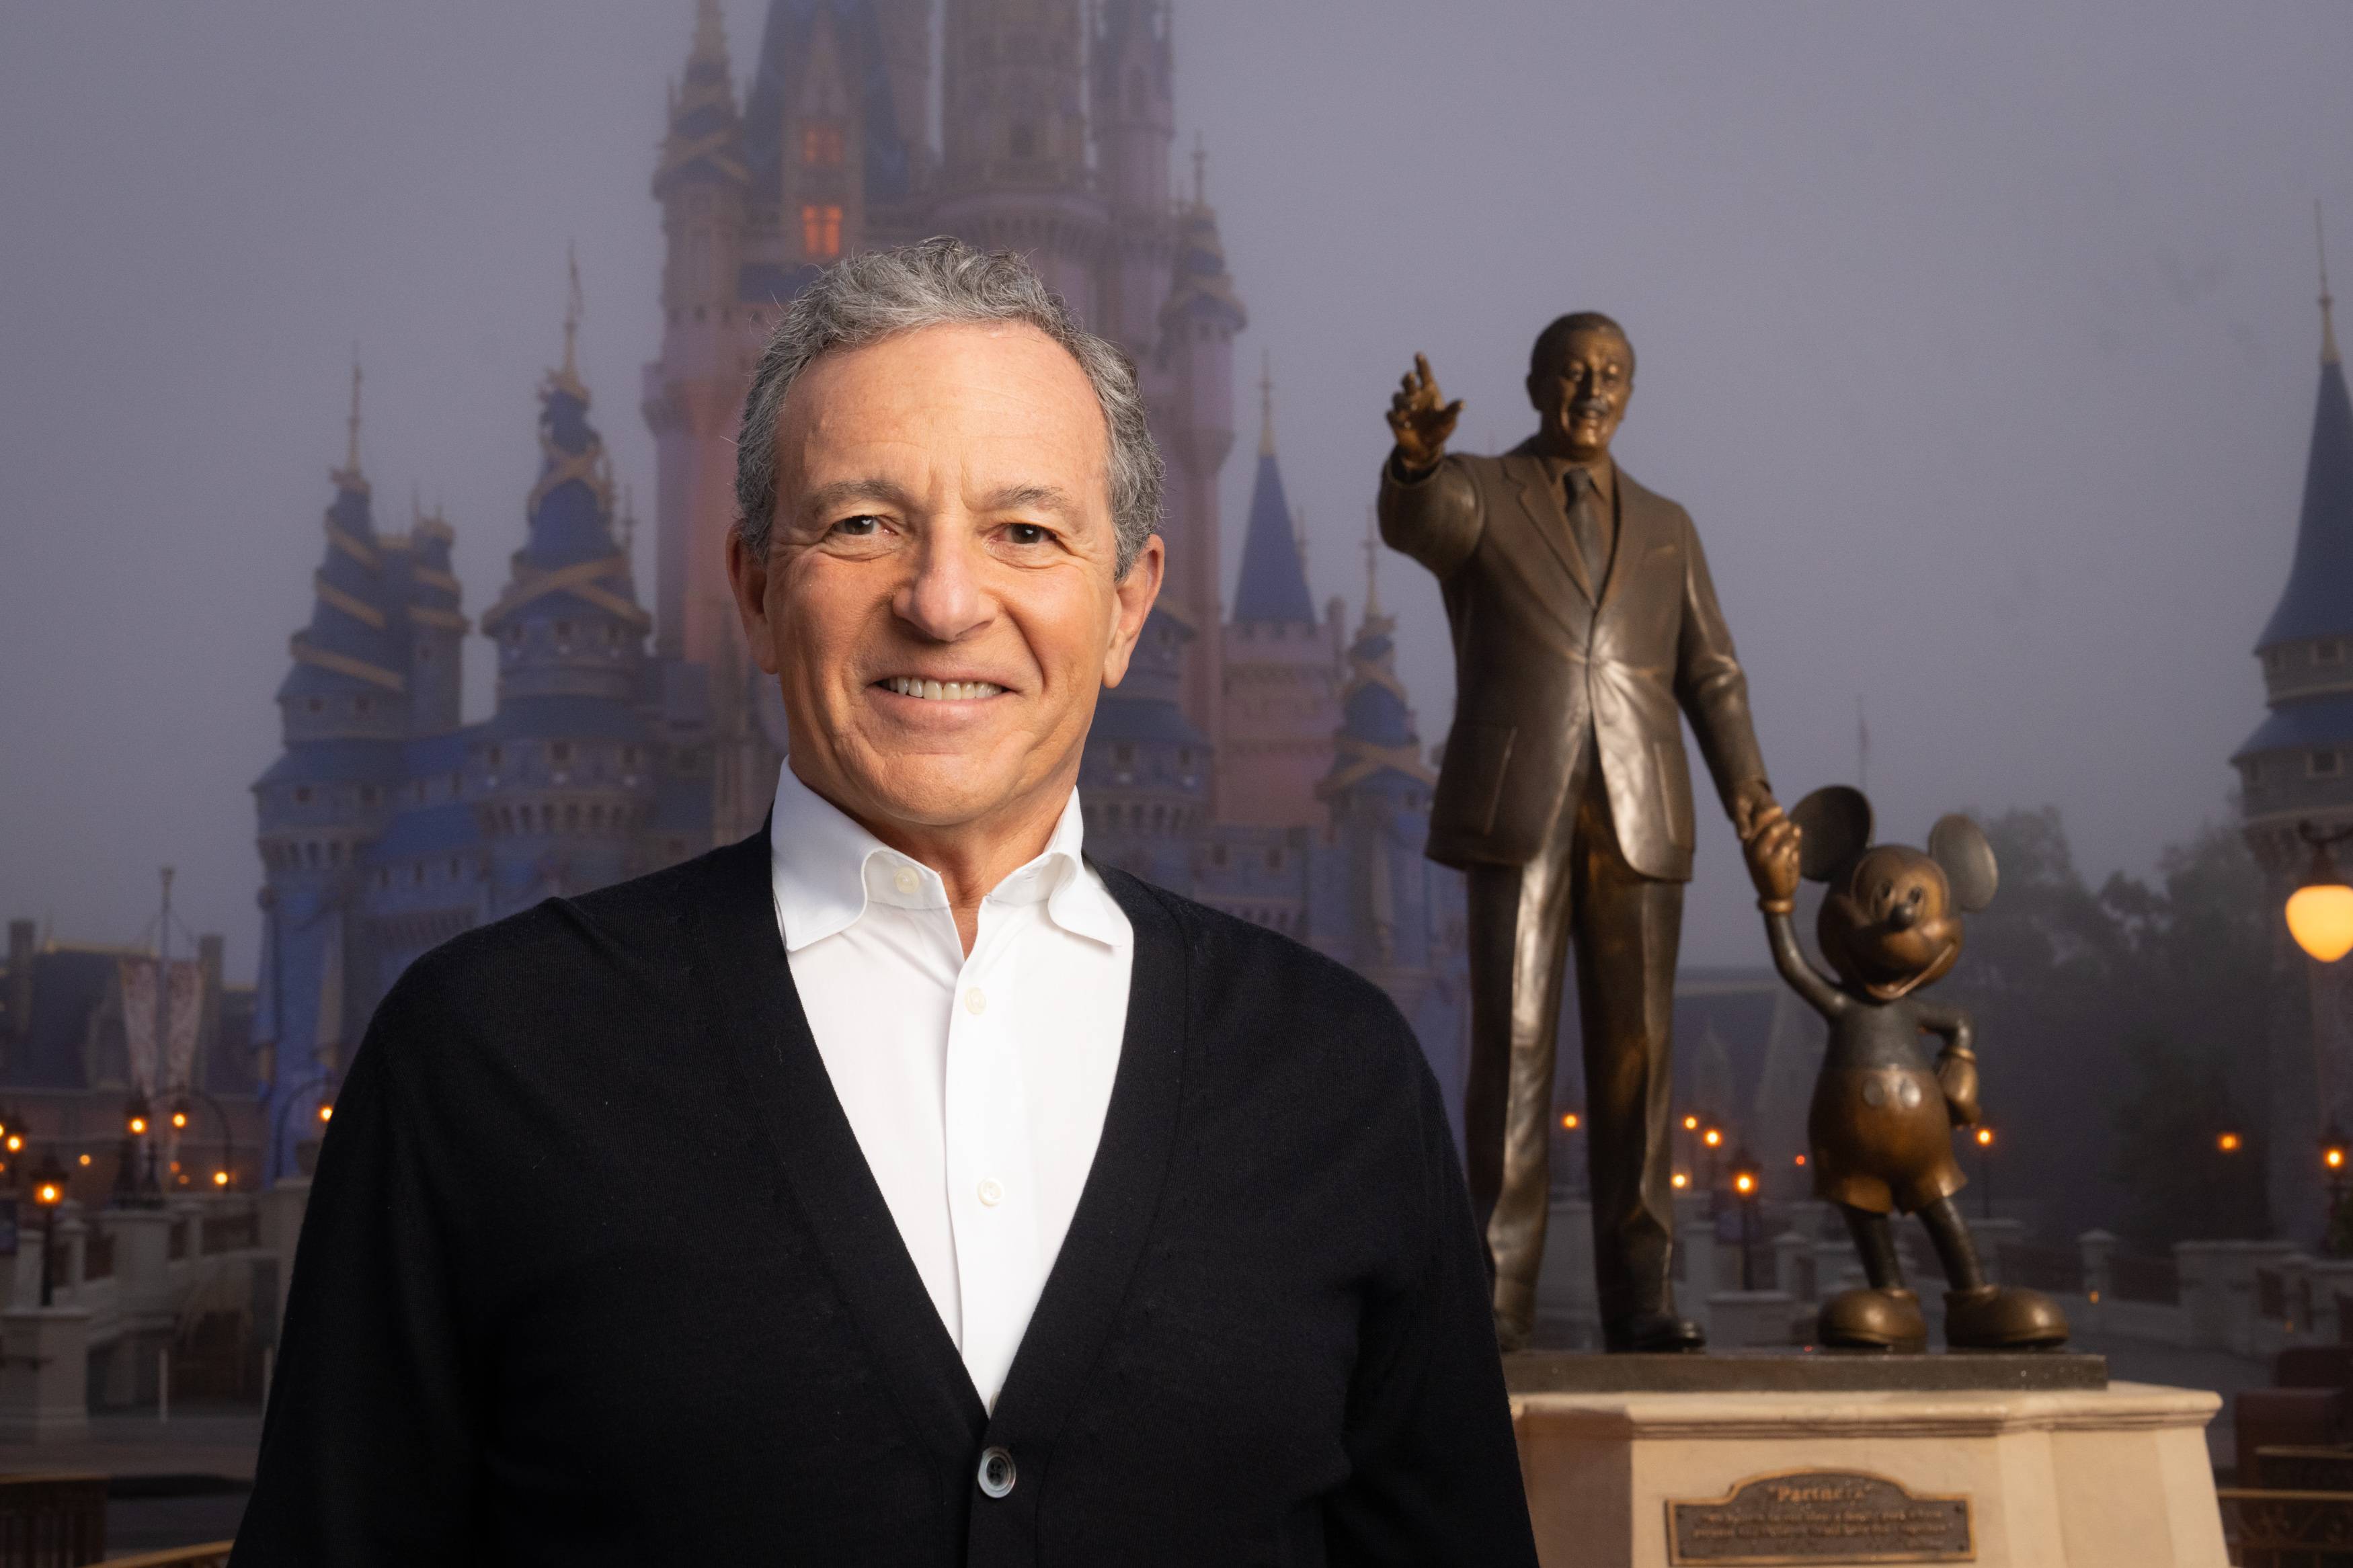 Frozen 4' Is in the Works, Reveals Disney CEO Bob Iger